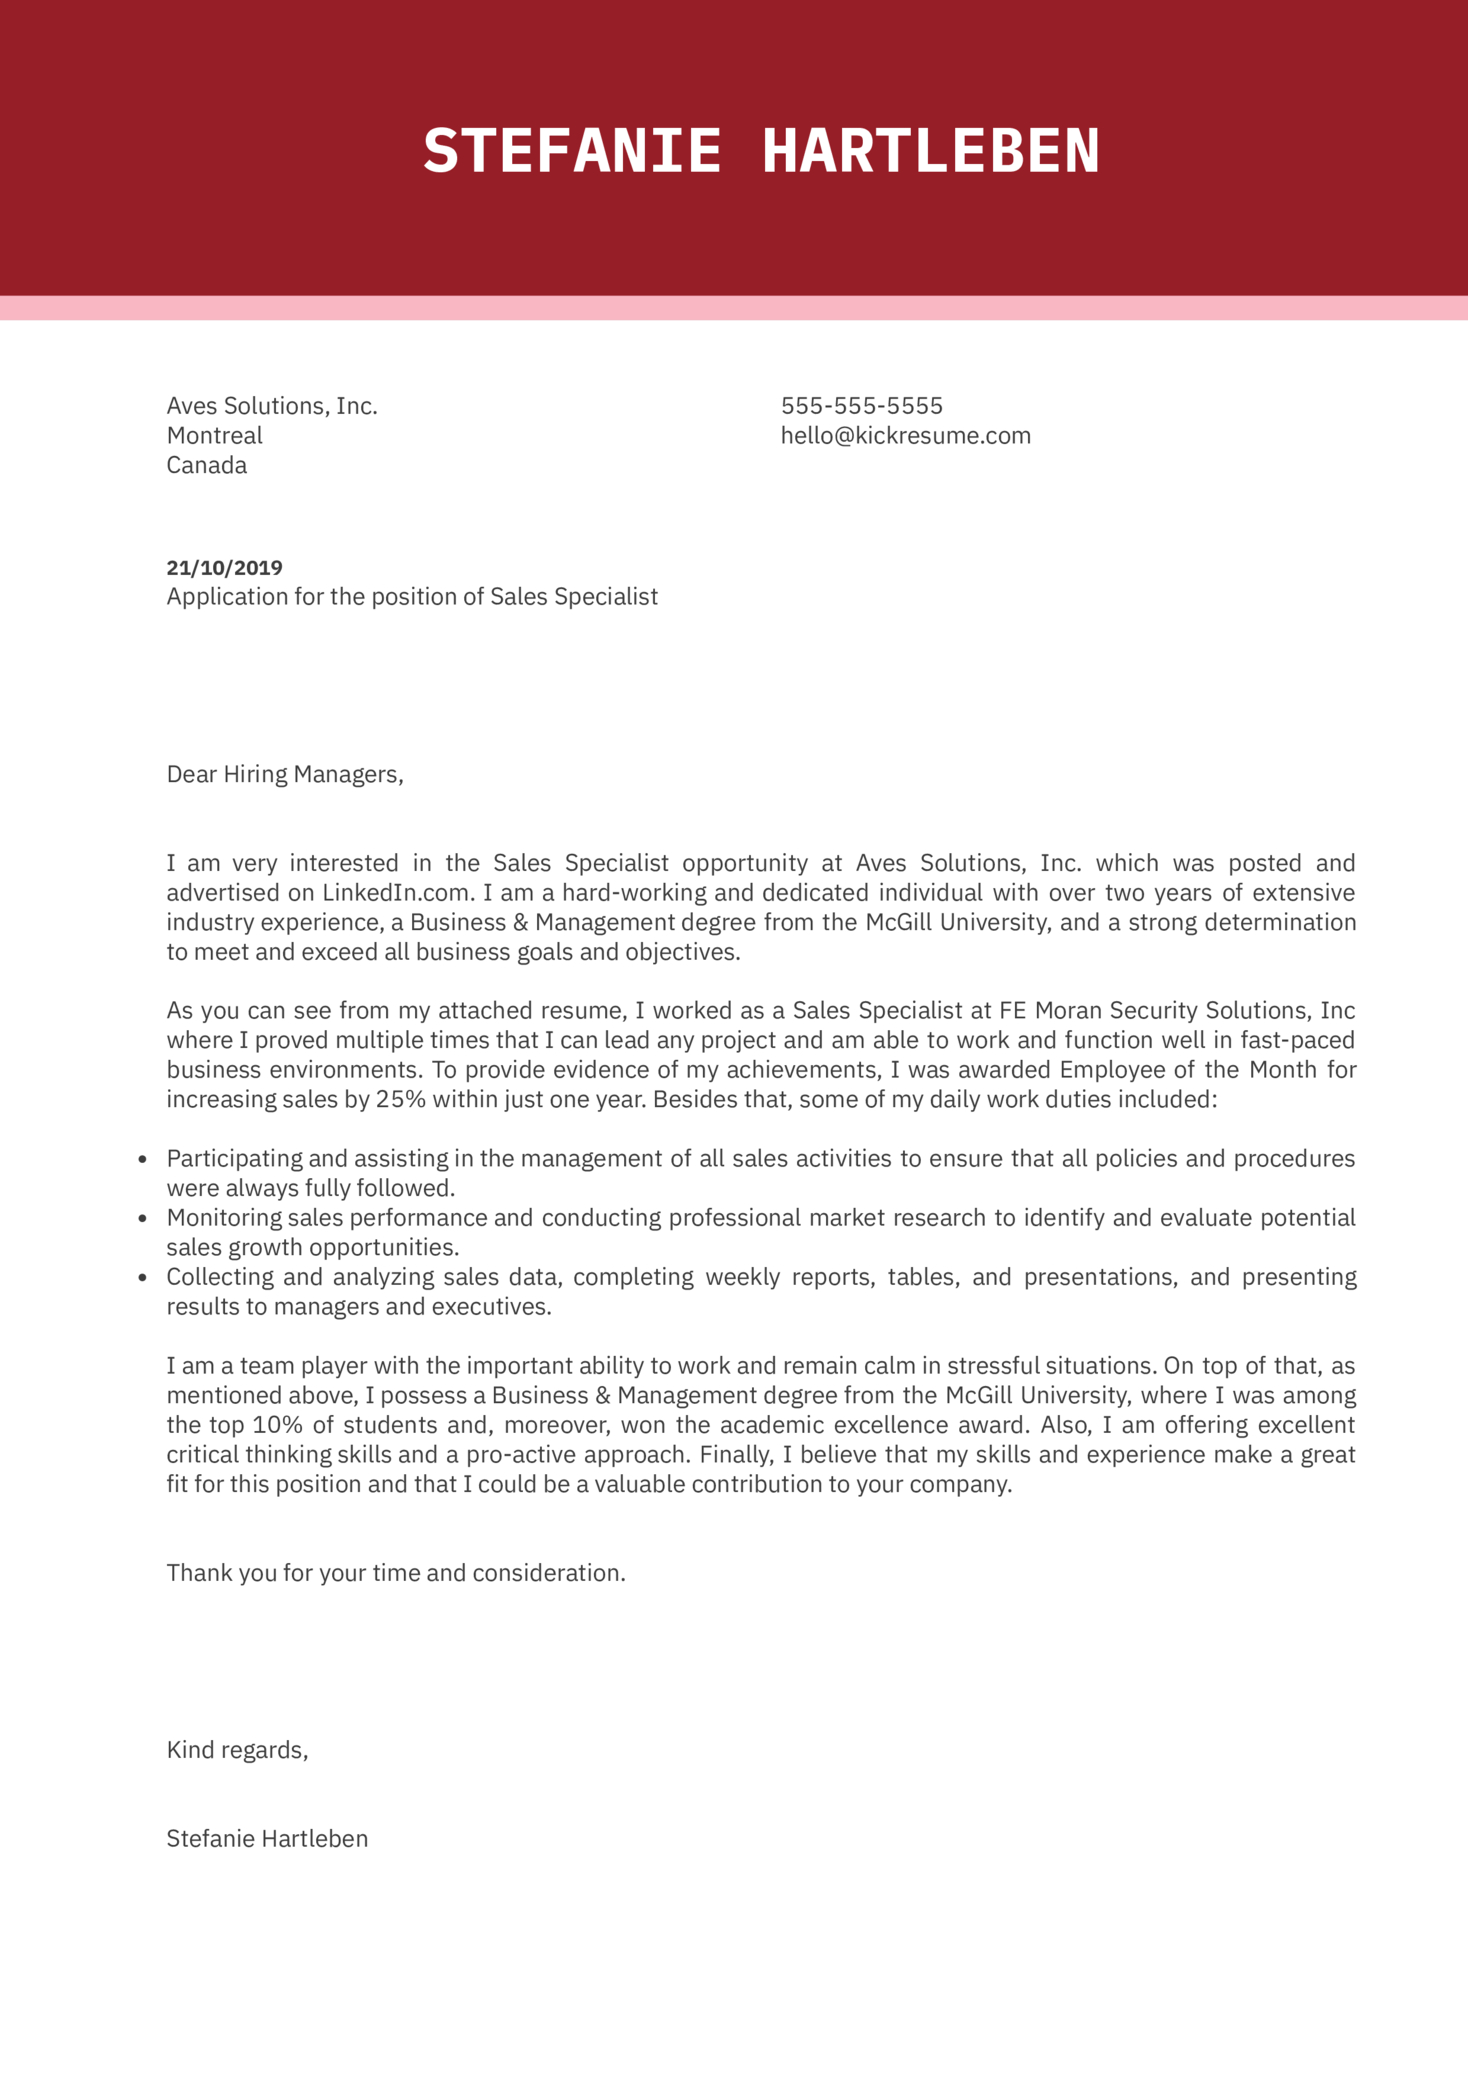 Chief Specialist Leed Cover Letter October 2021 - Resume throughout Leed Letter Template